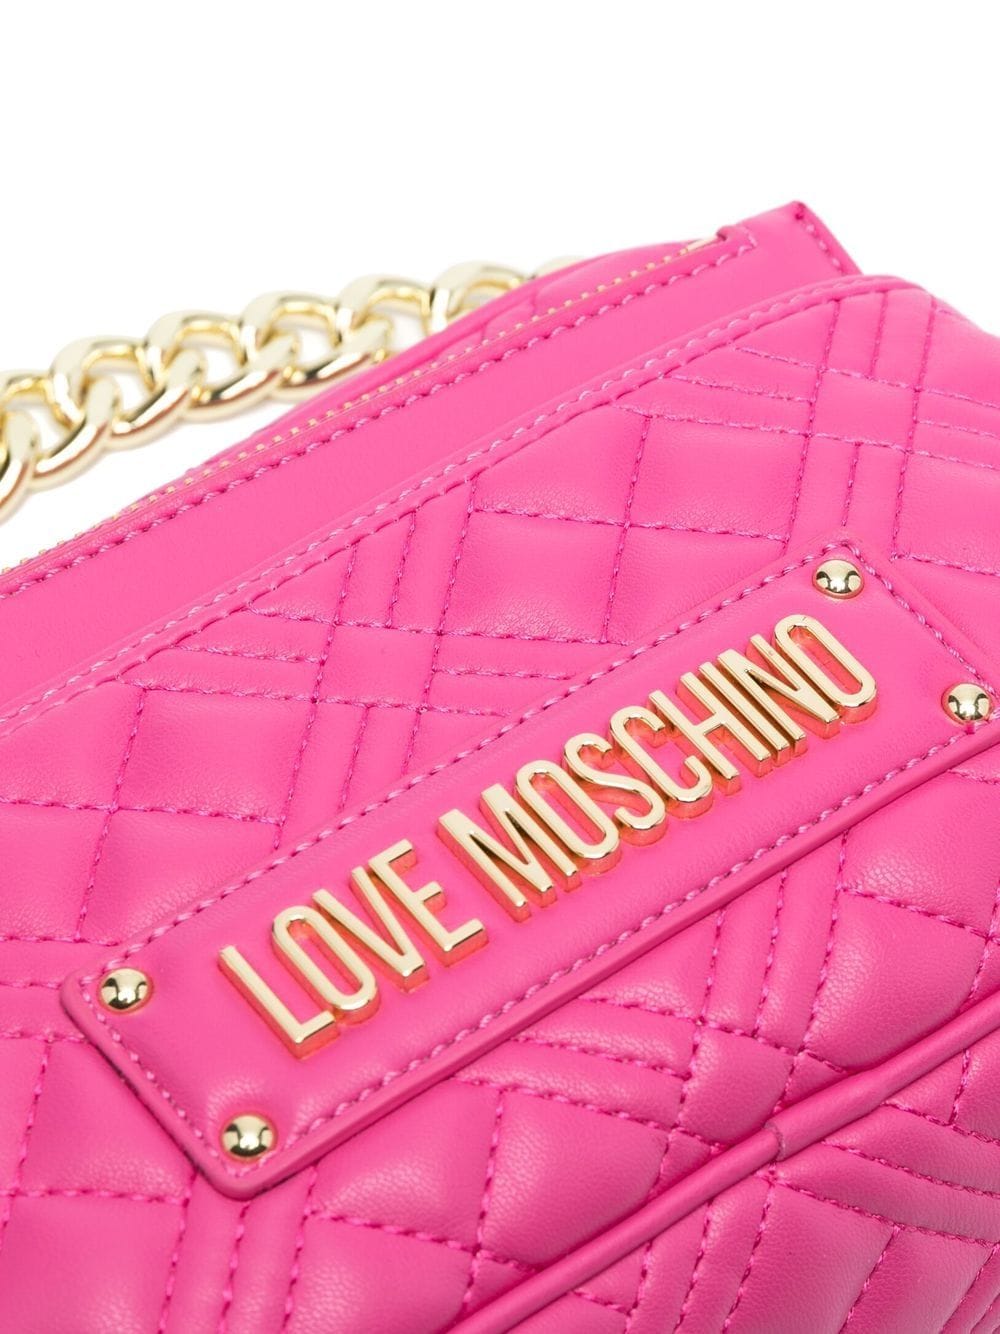 Cross body bags Moschino - Capsule collection round crossbody -  A759980511888